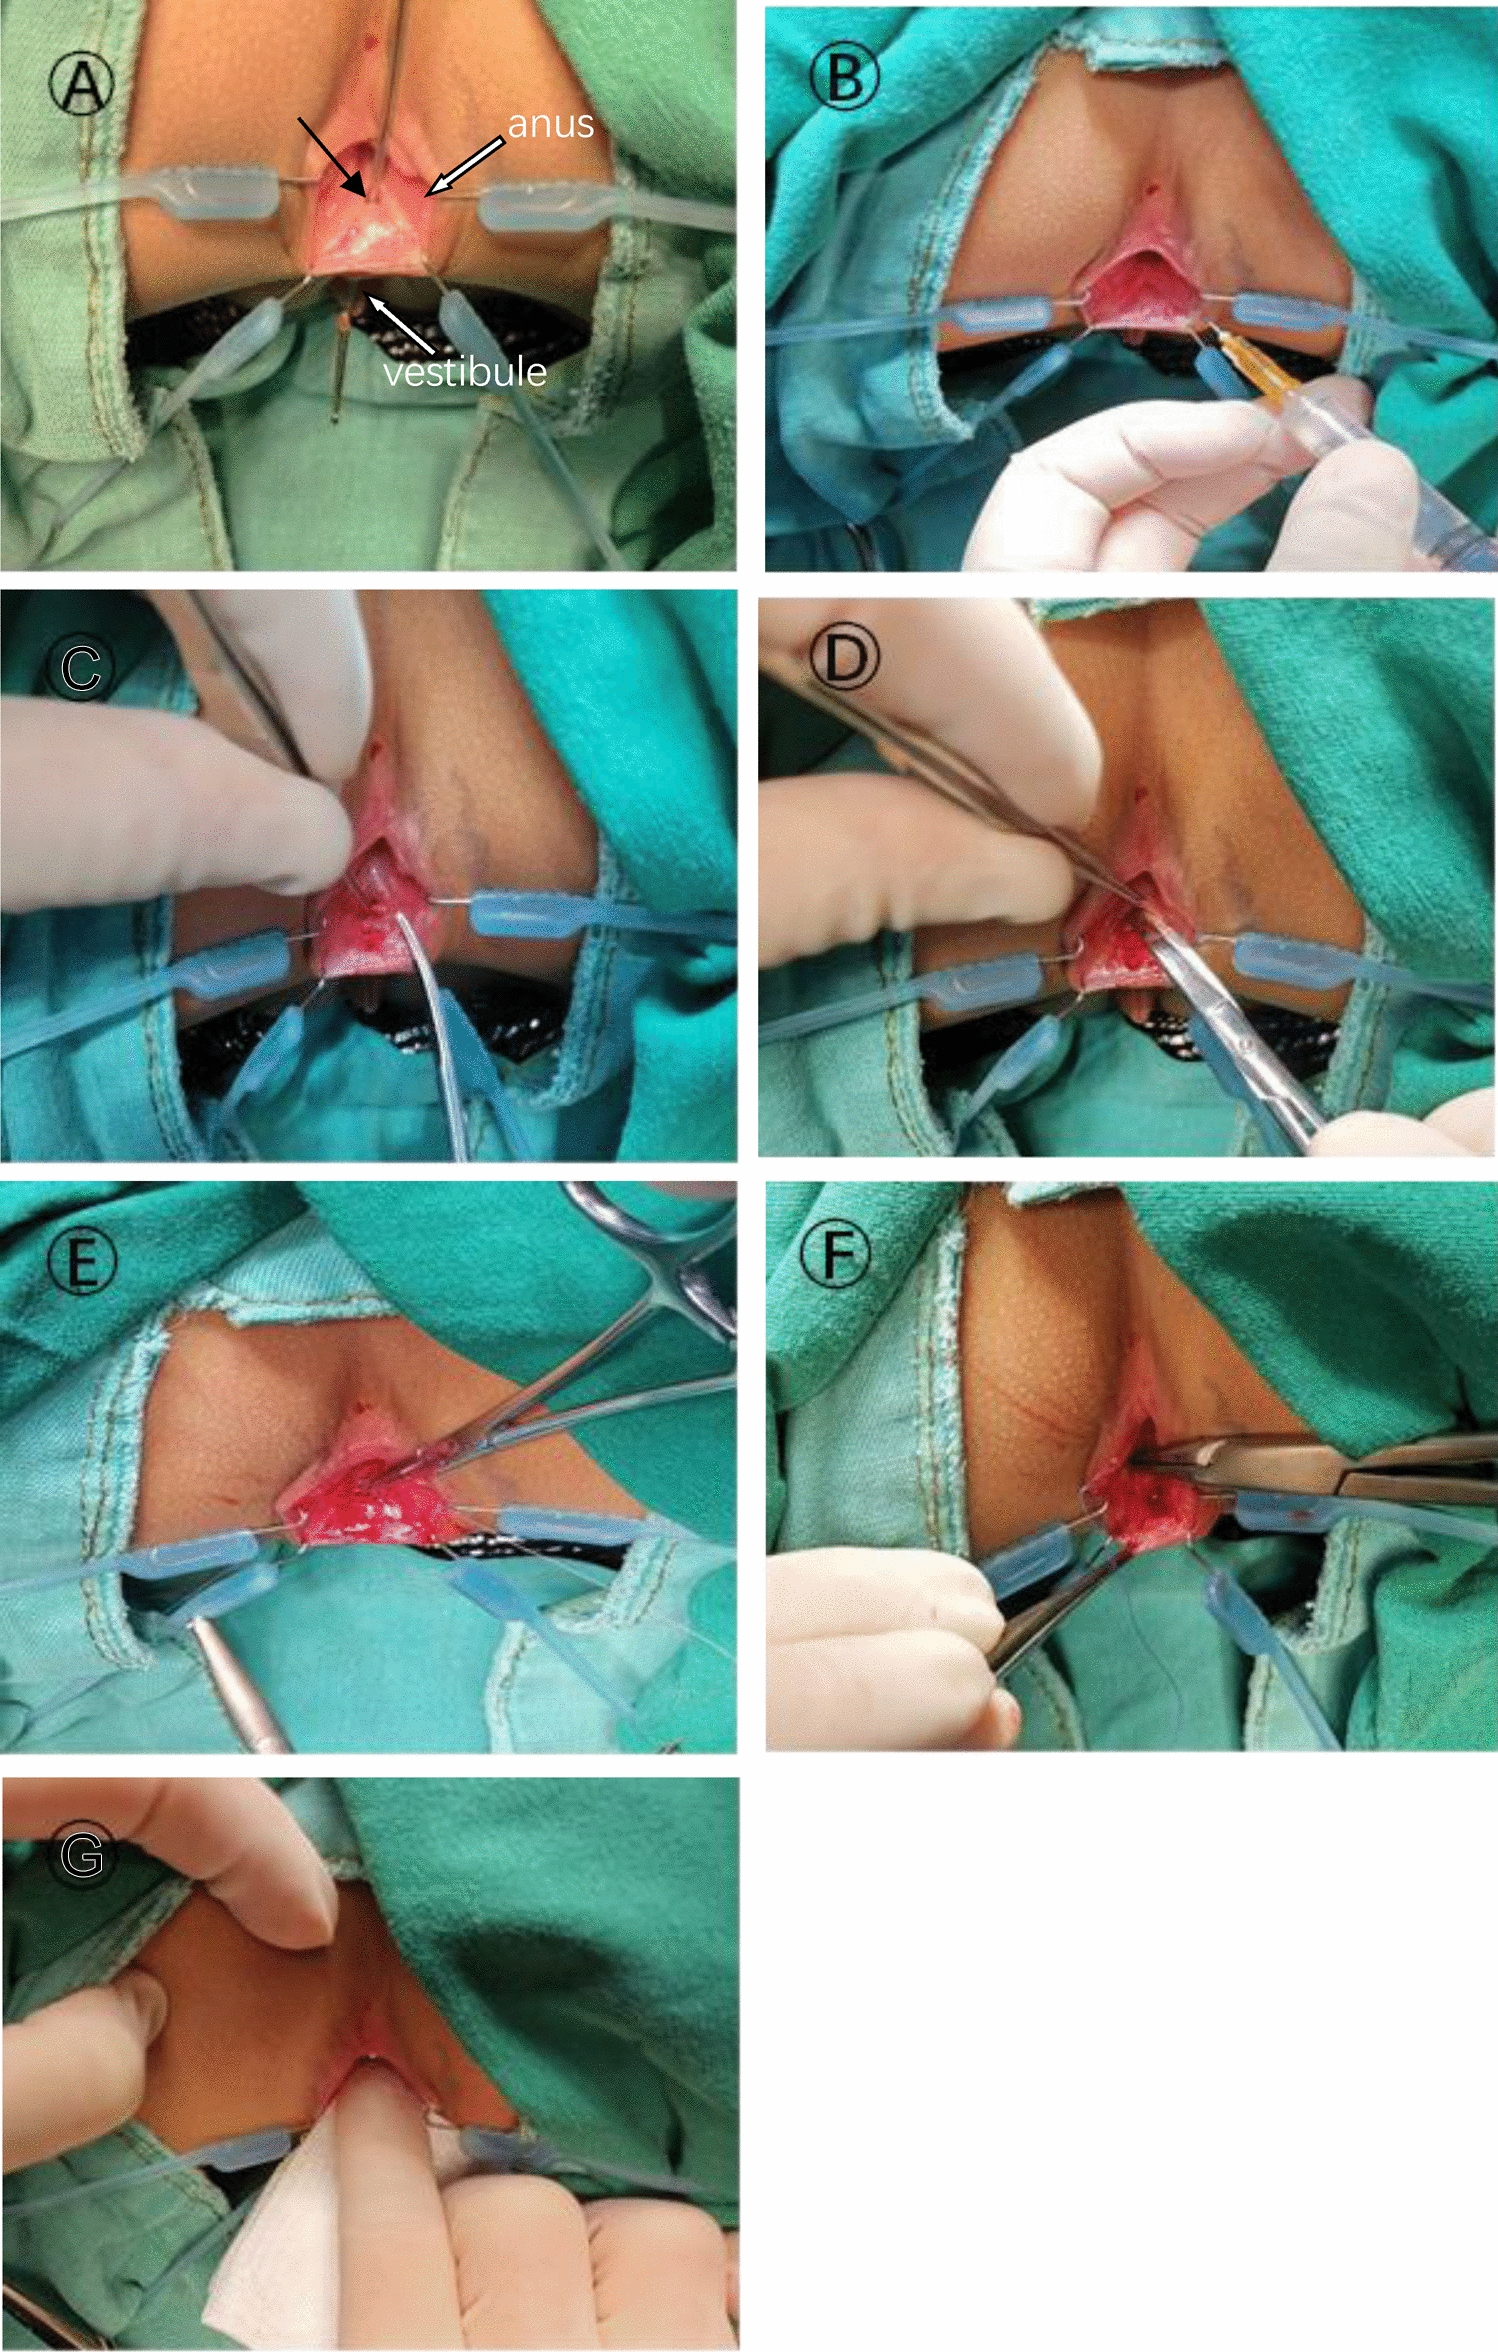 Transanal fistula repair for the treatment of rectovestibular fistula with normal anus in female children: a 5-year single-center experience